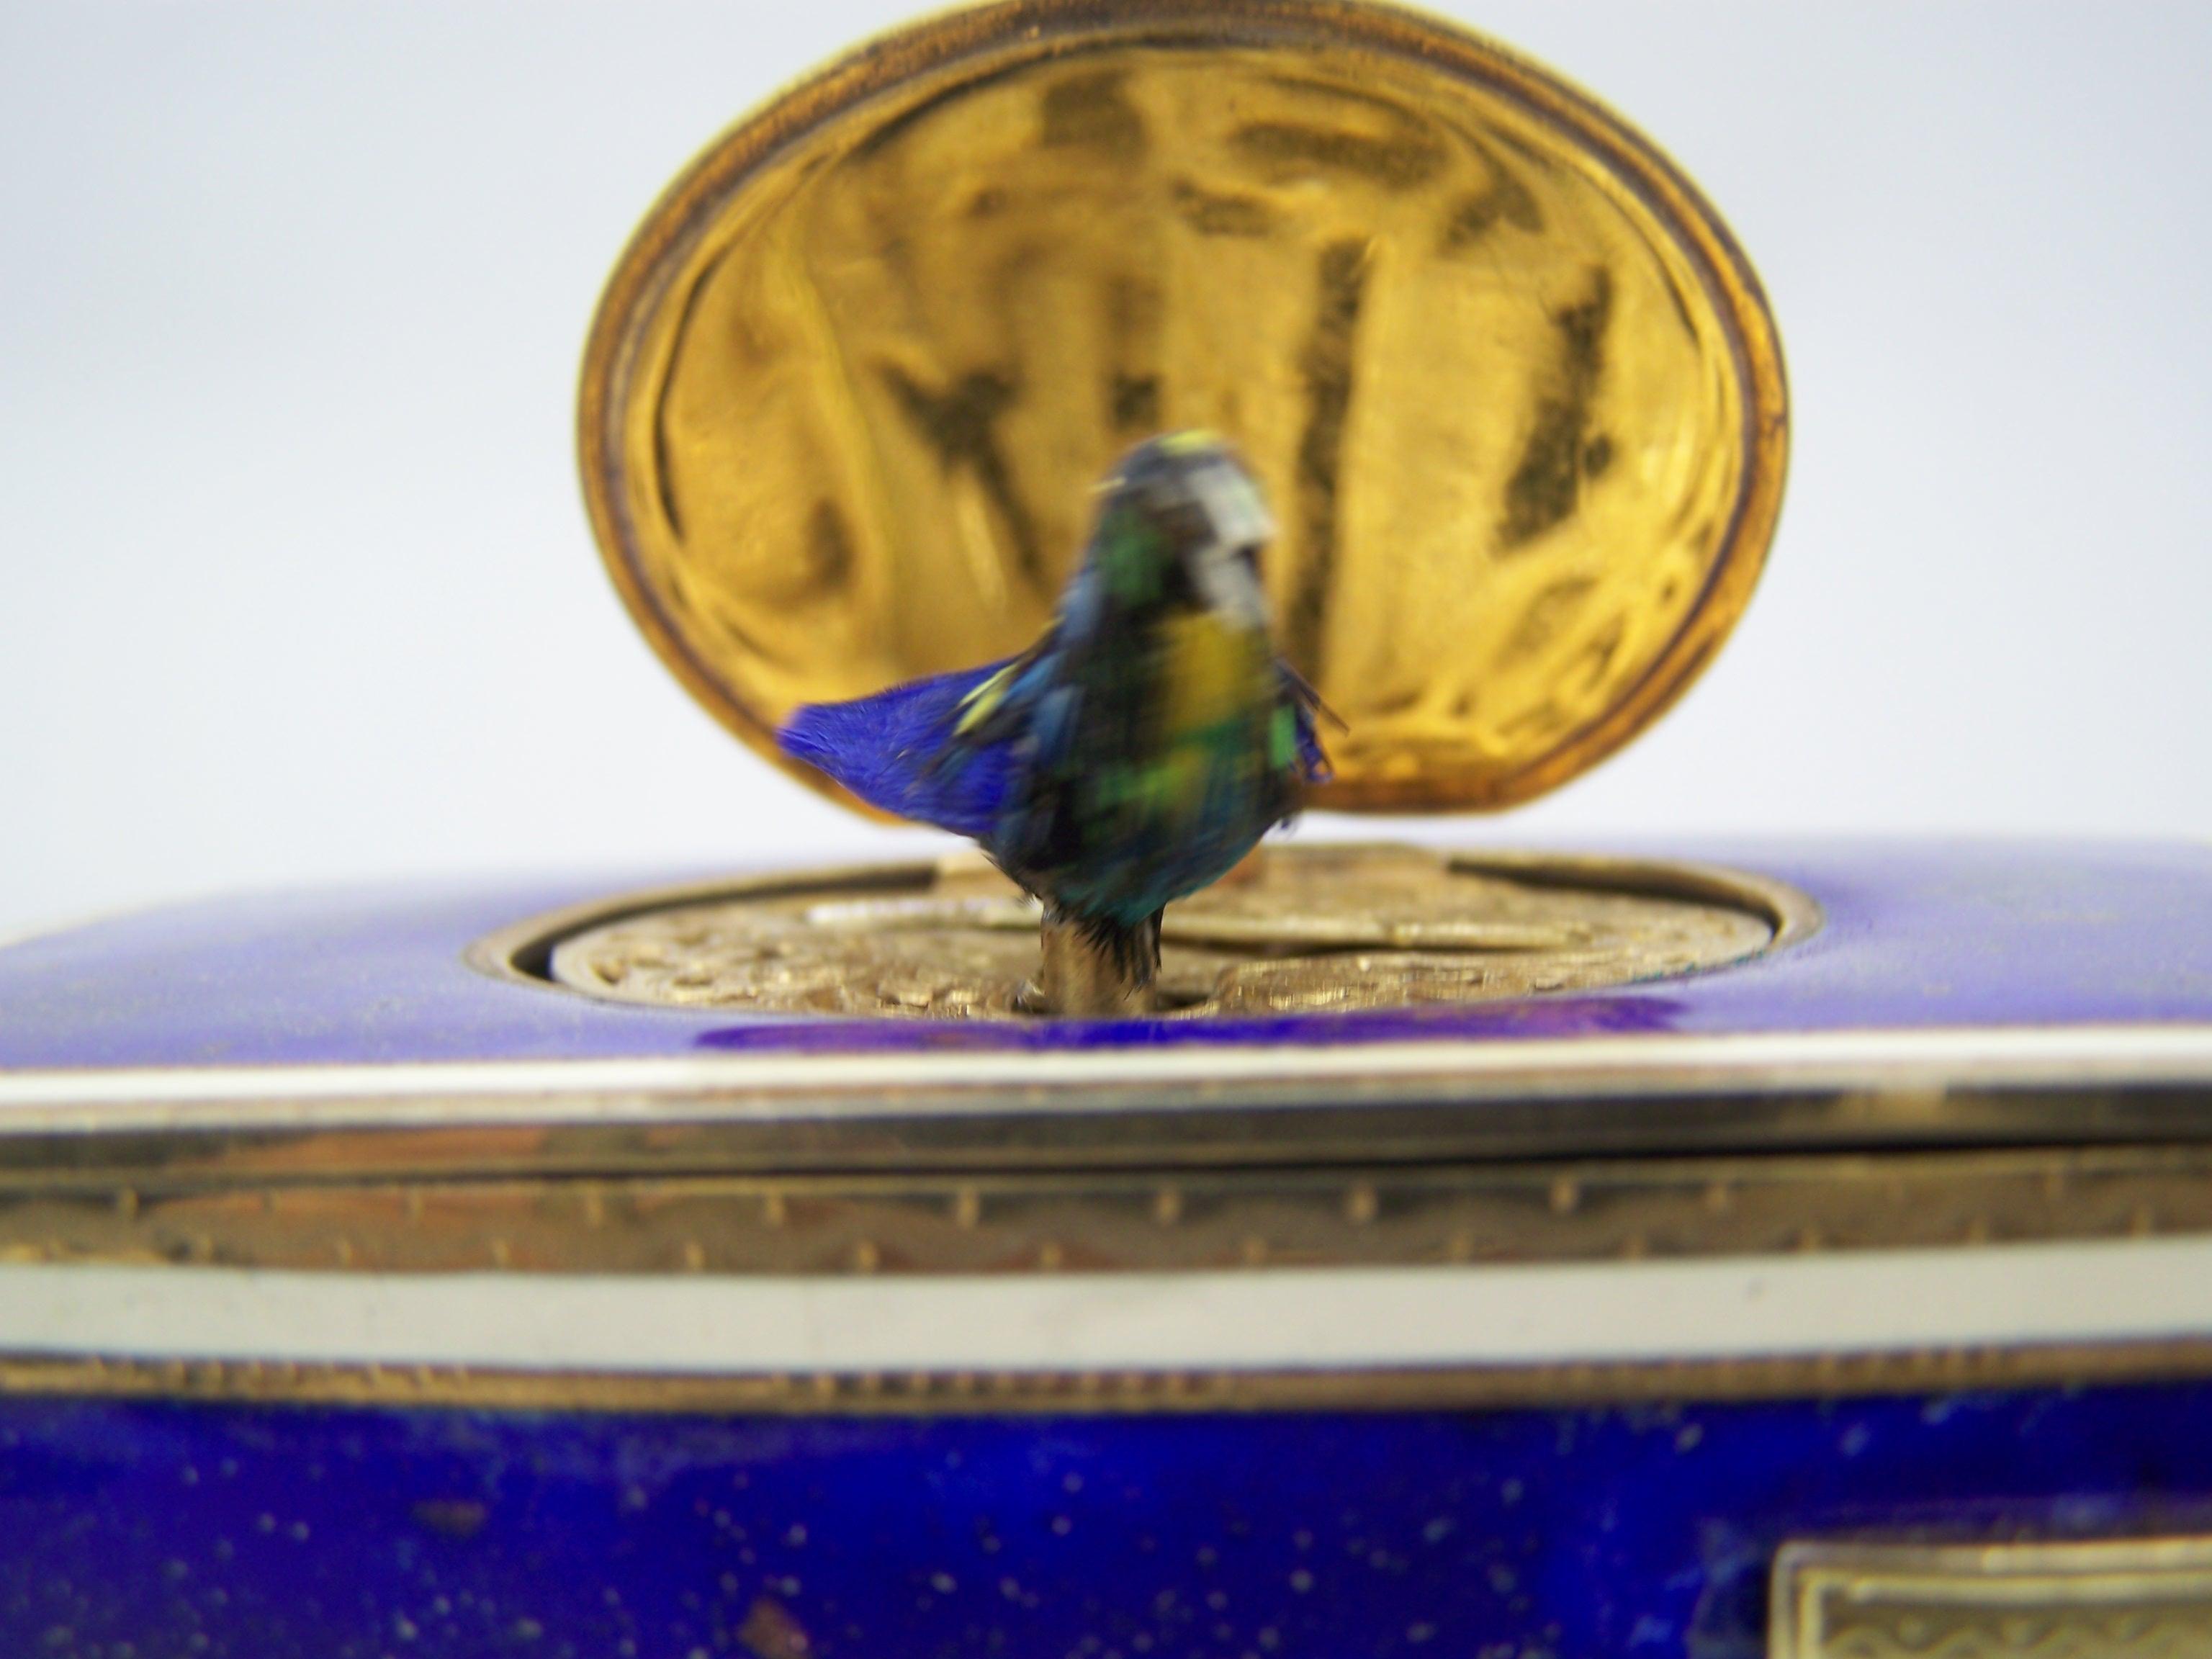 Singing bird box by K Griesbaum in guilded case and blue-goldflaked enamel 2